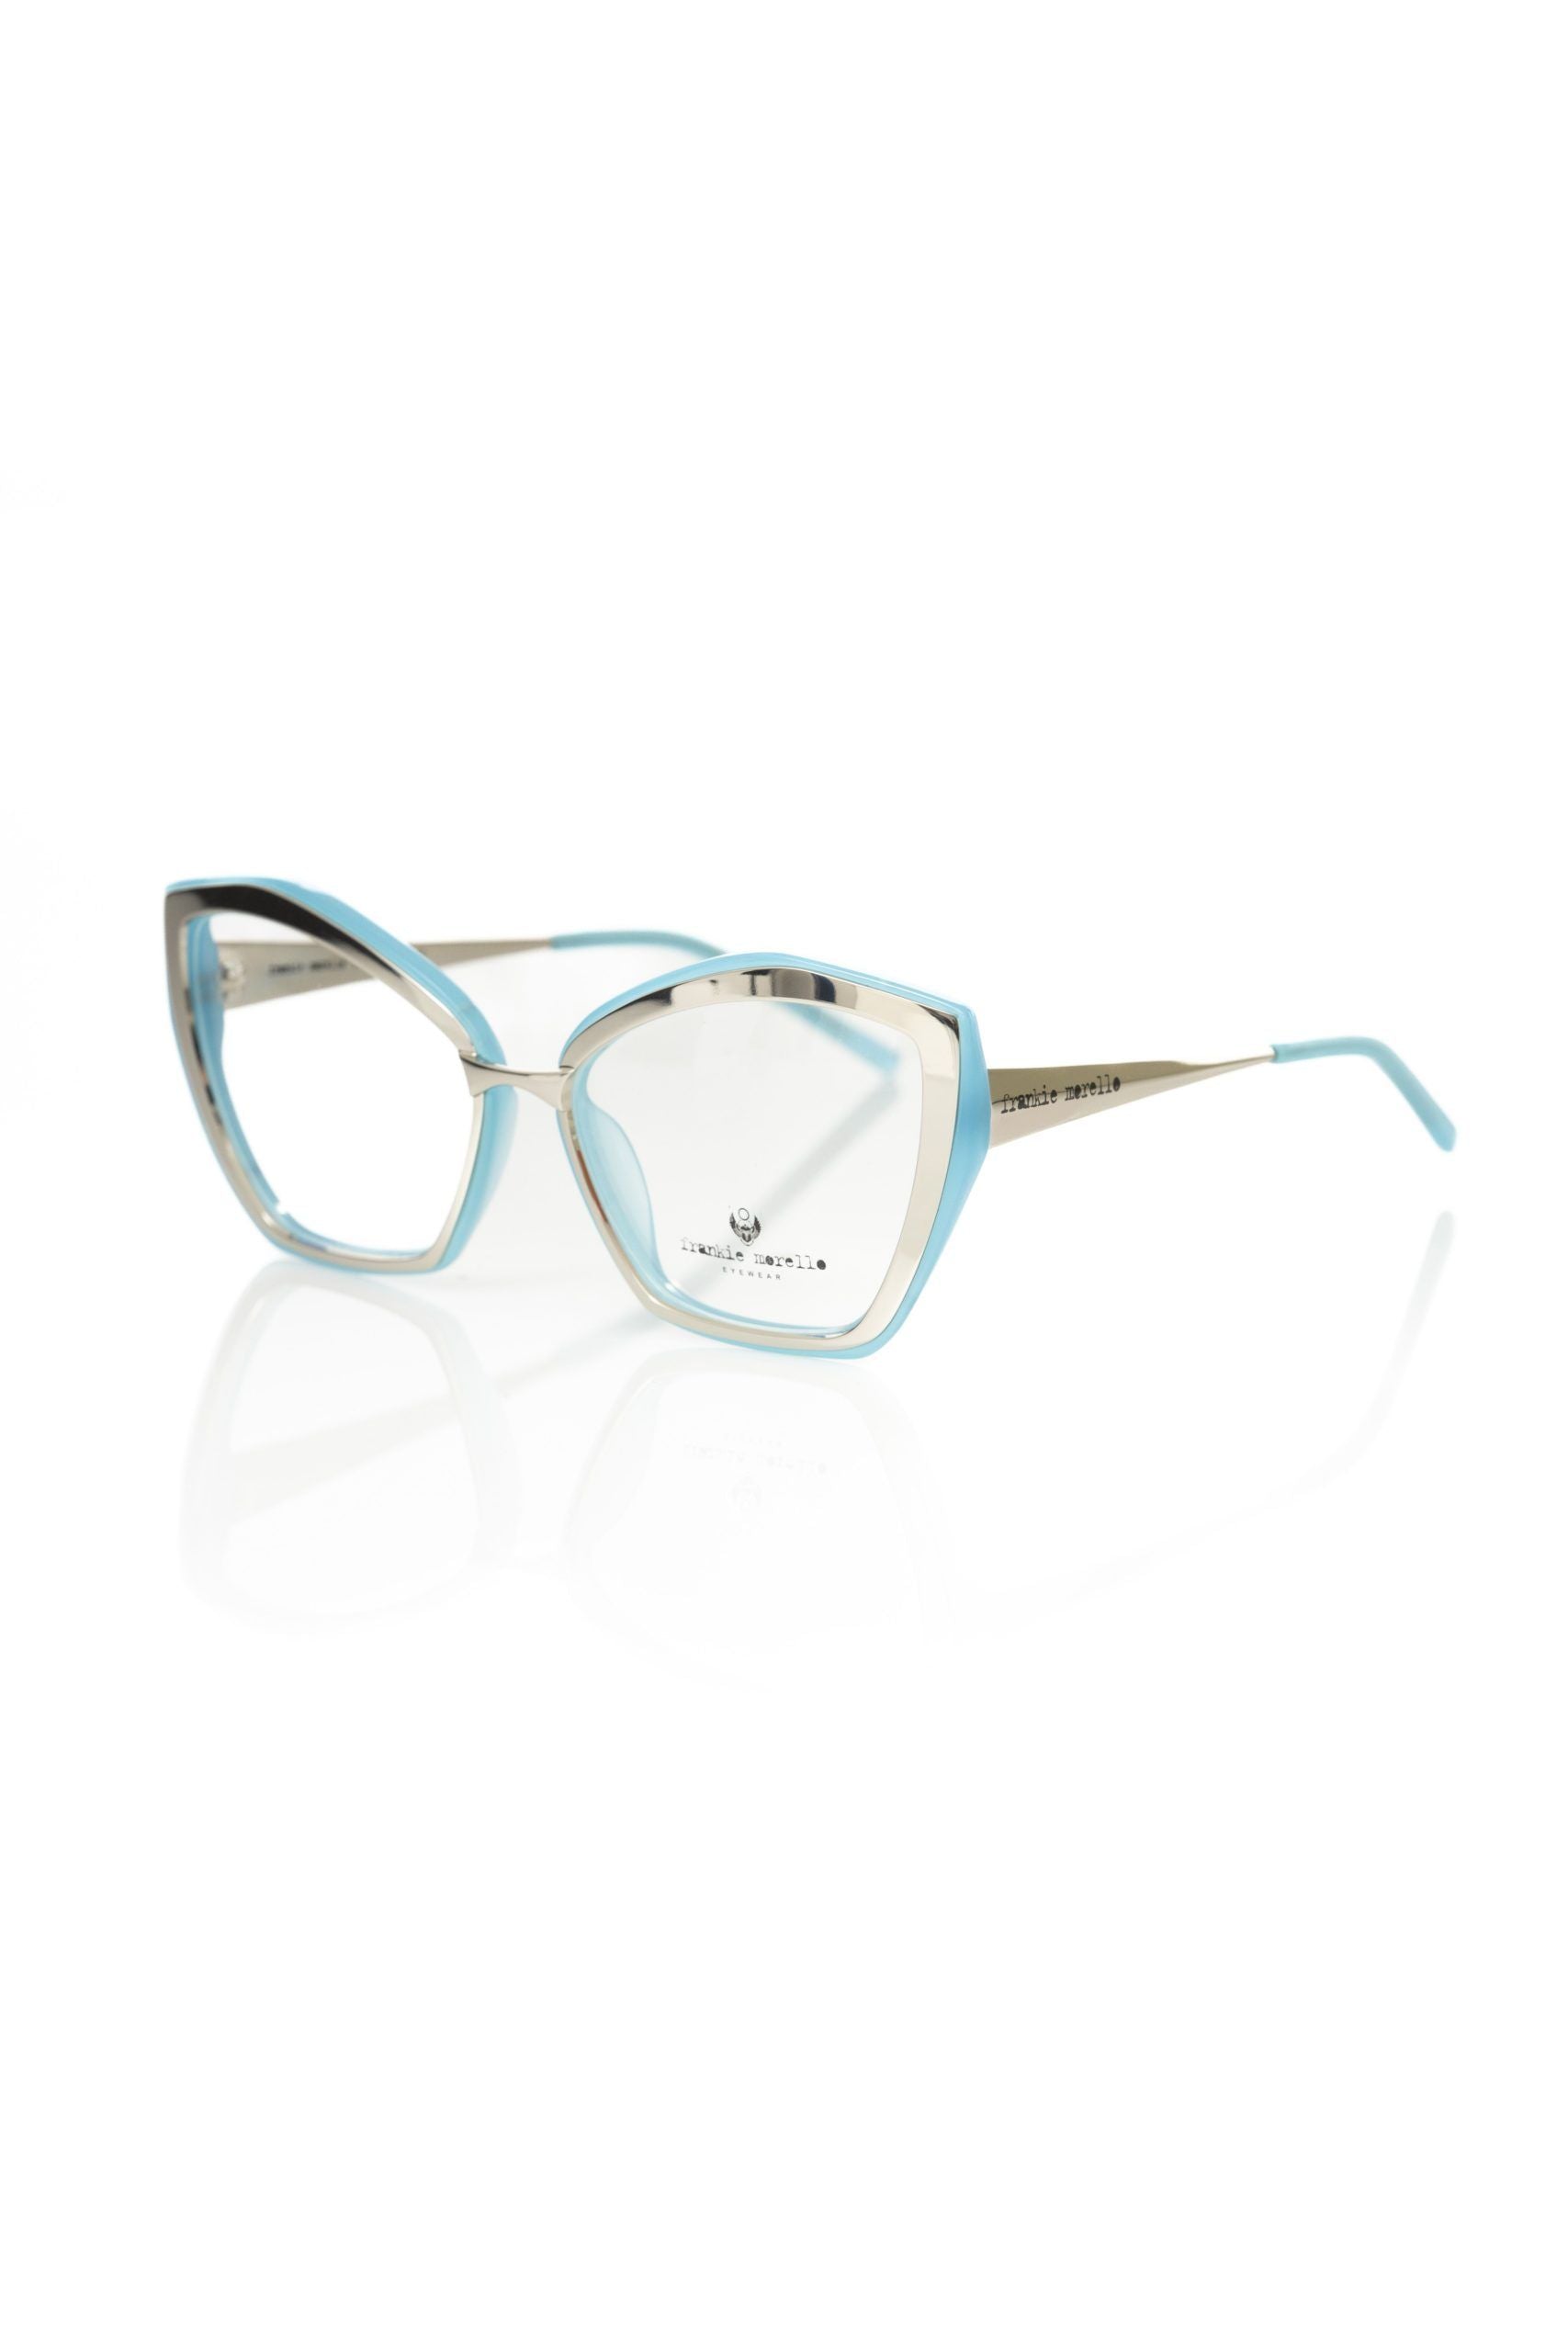 Frankie Morello FRMO-22096 Multicolor Acetate Frames - Designed by Frankie Morello Available to Buy at a Discounted Price on Moon Behind The Hill Online Designer Discount Store